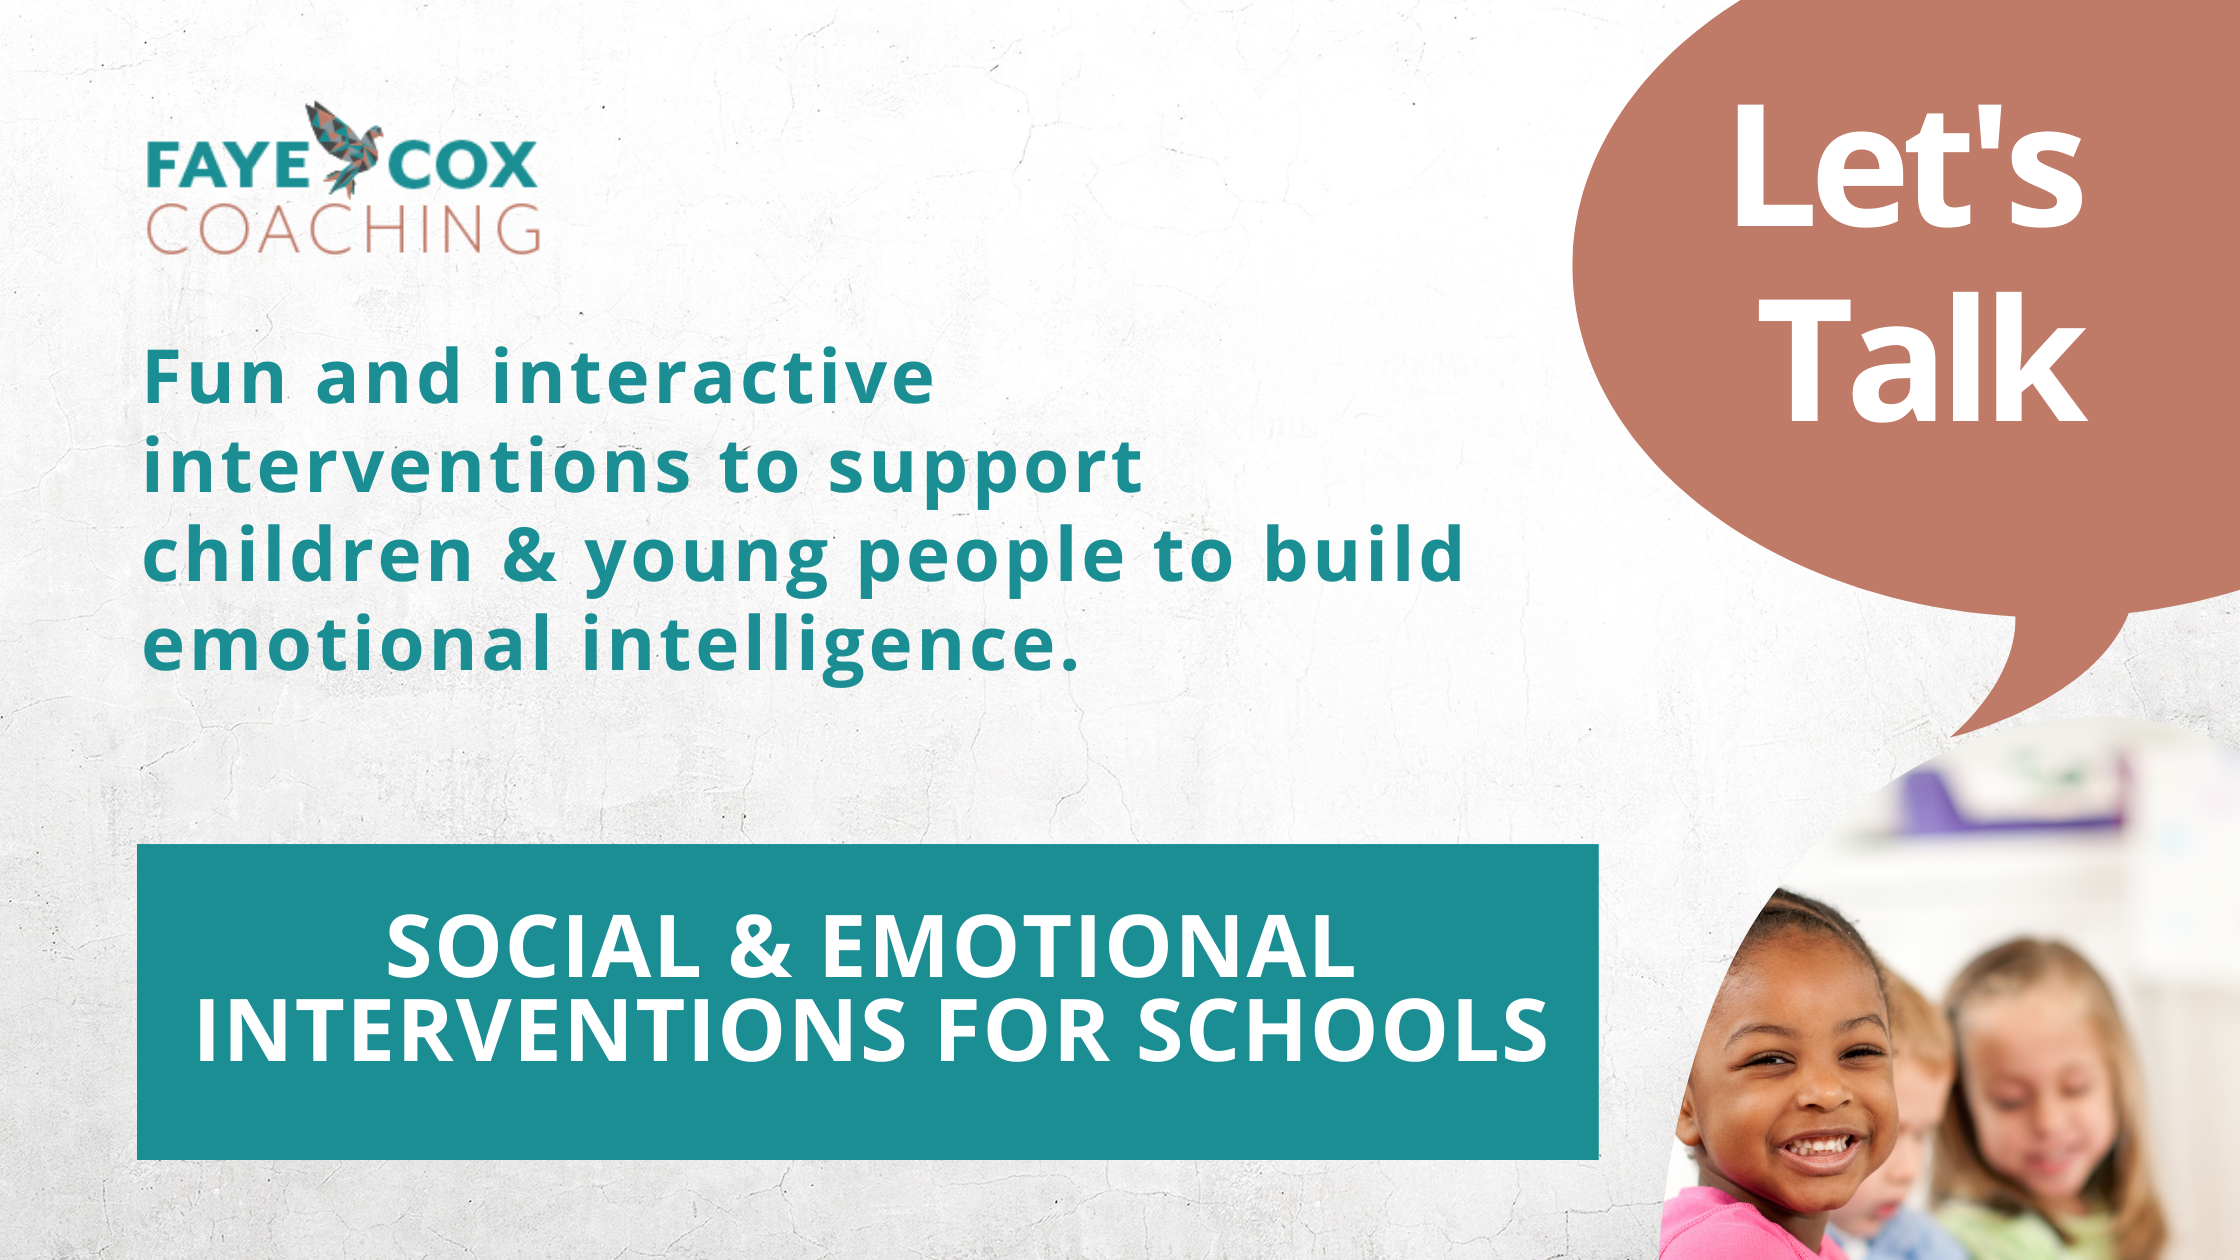 Social & Emotional Interventions for Schools